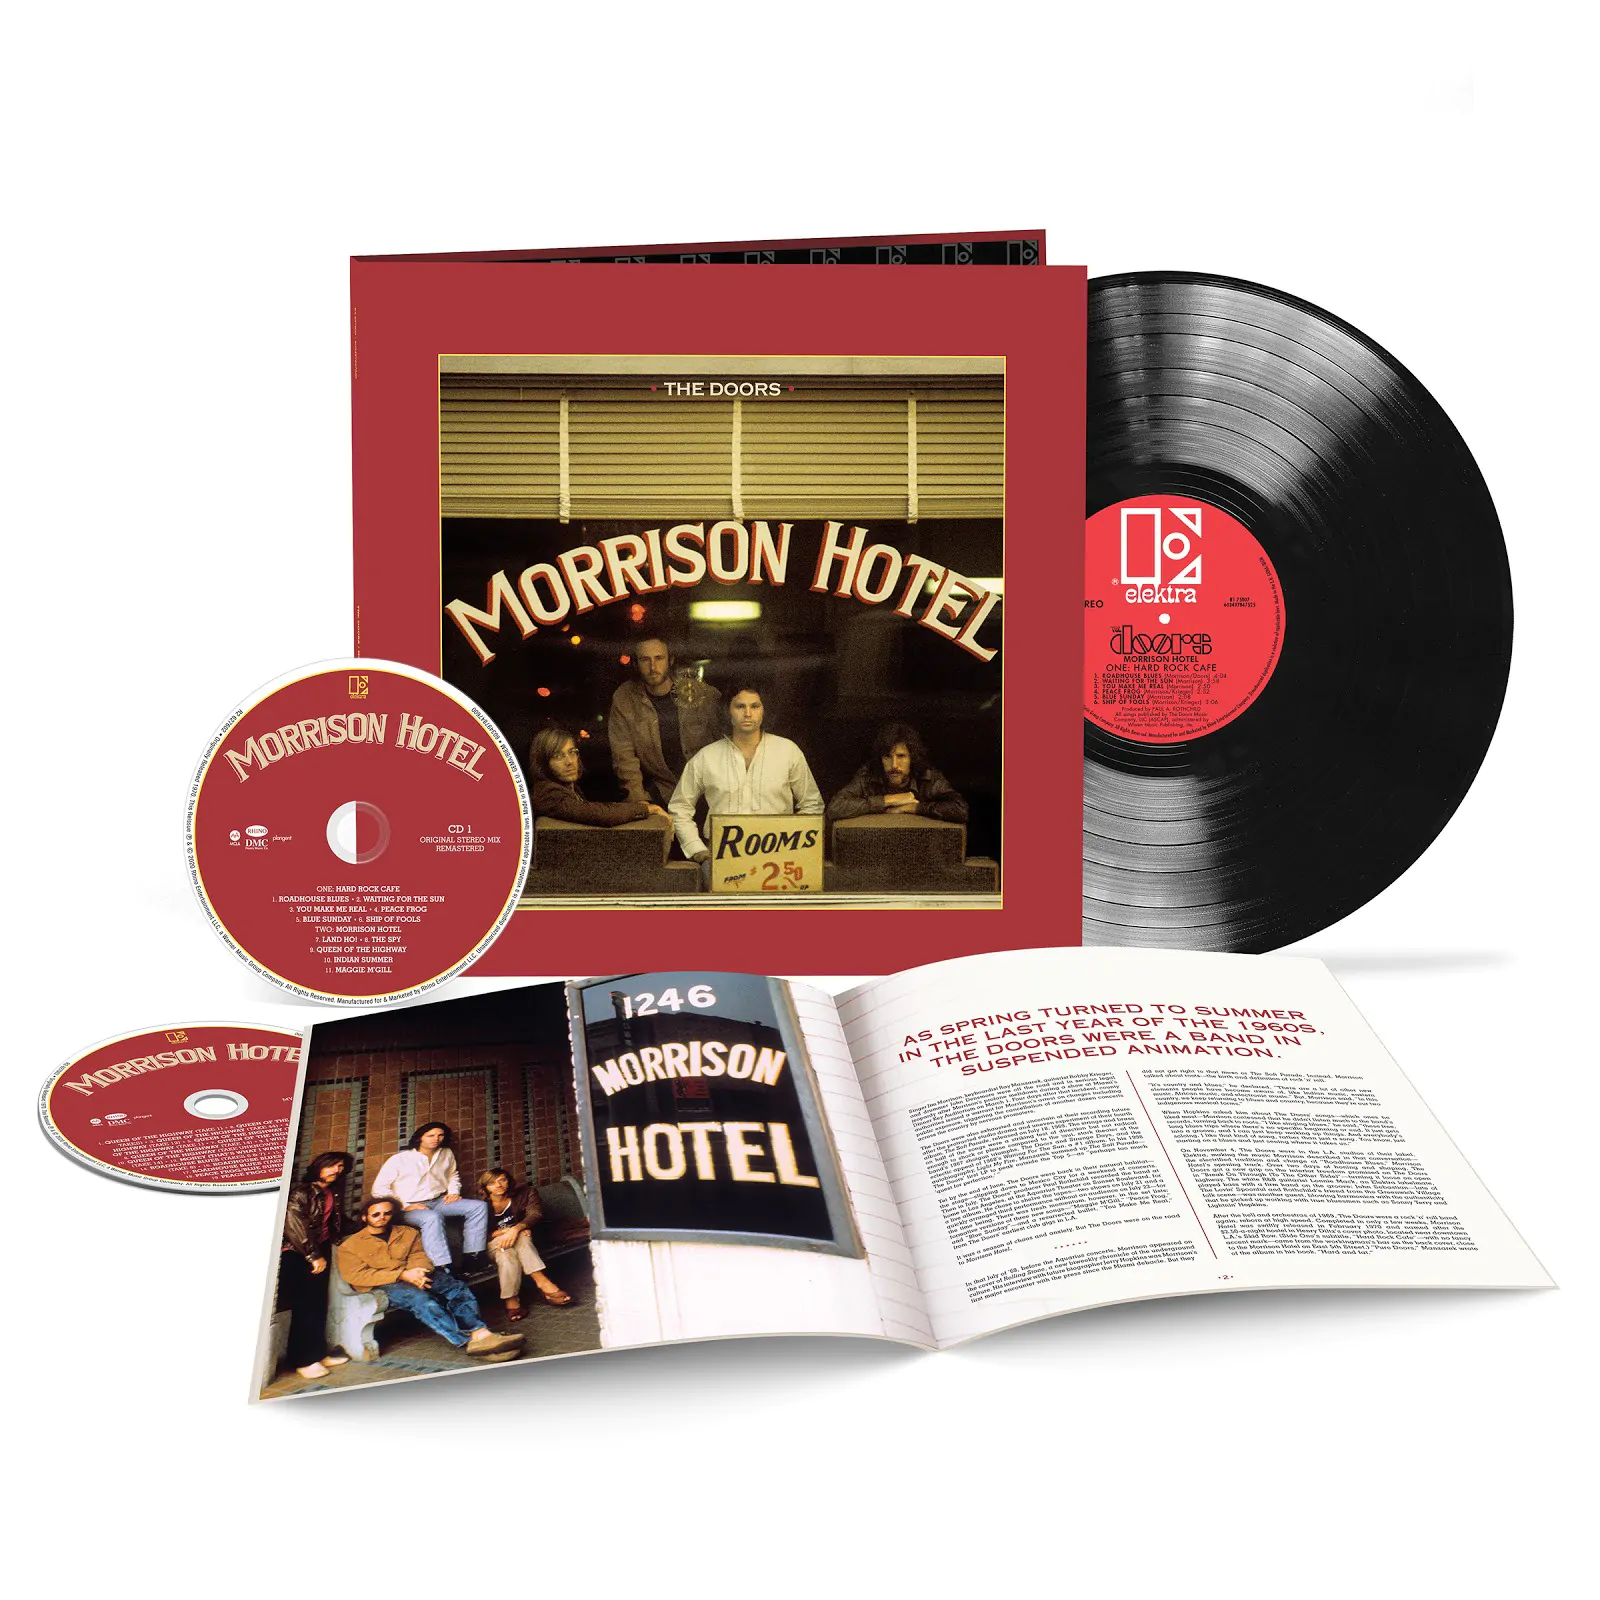 THE DOORS celebrate 50th anniversary of ‘Morrison Hotel’ with special deluxe edition release